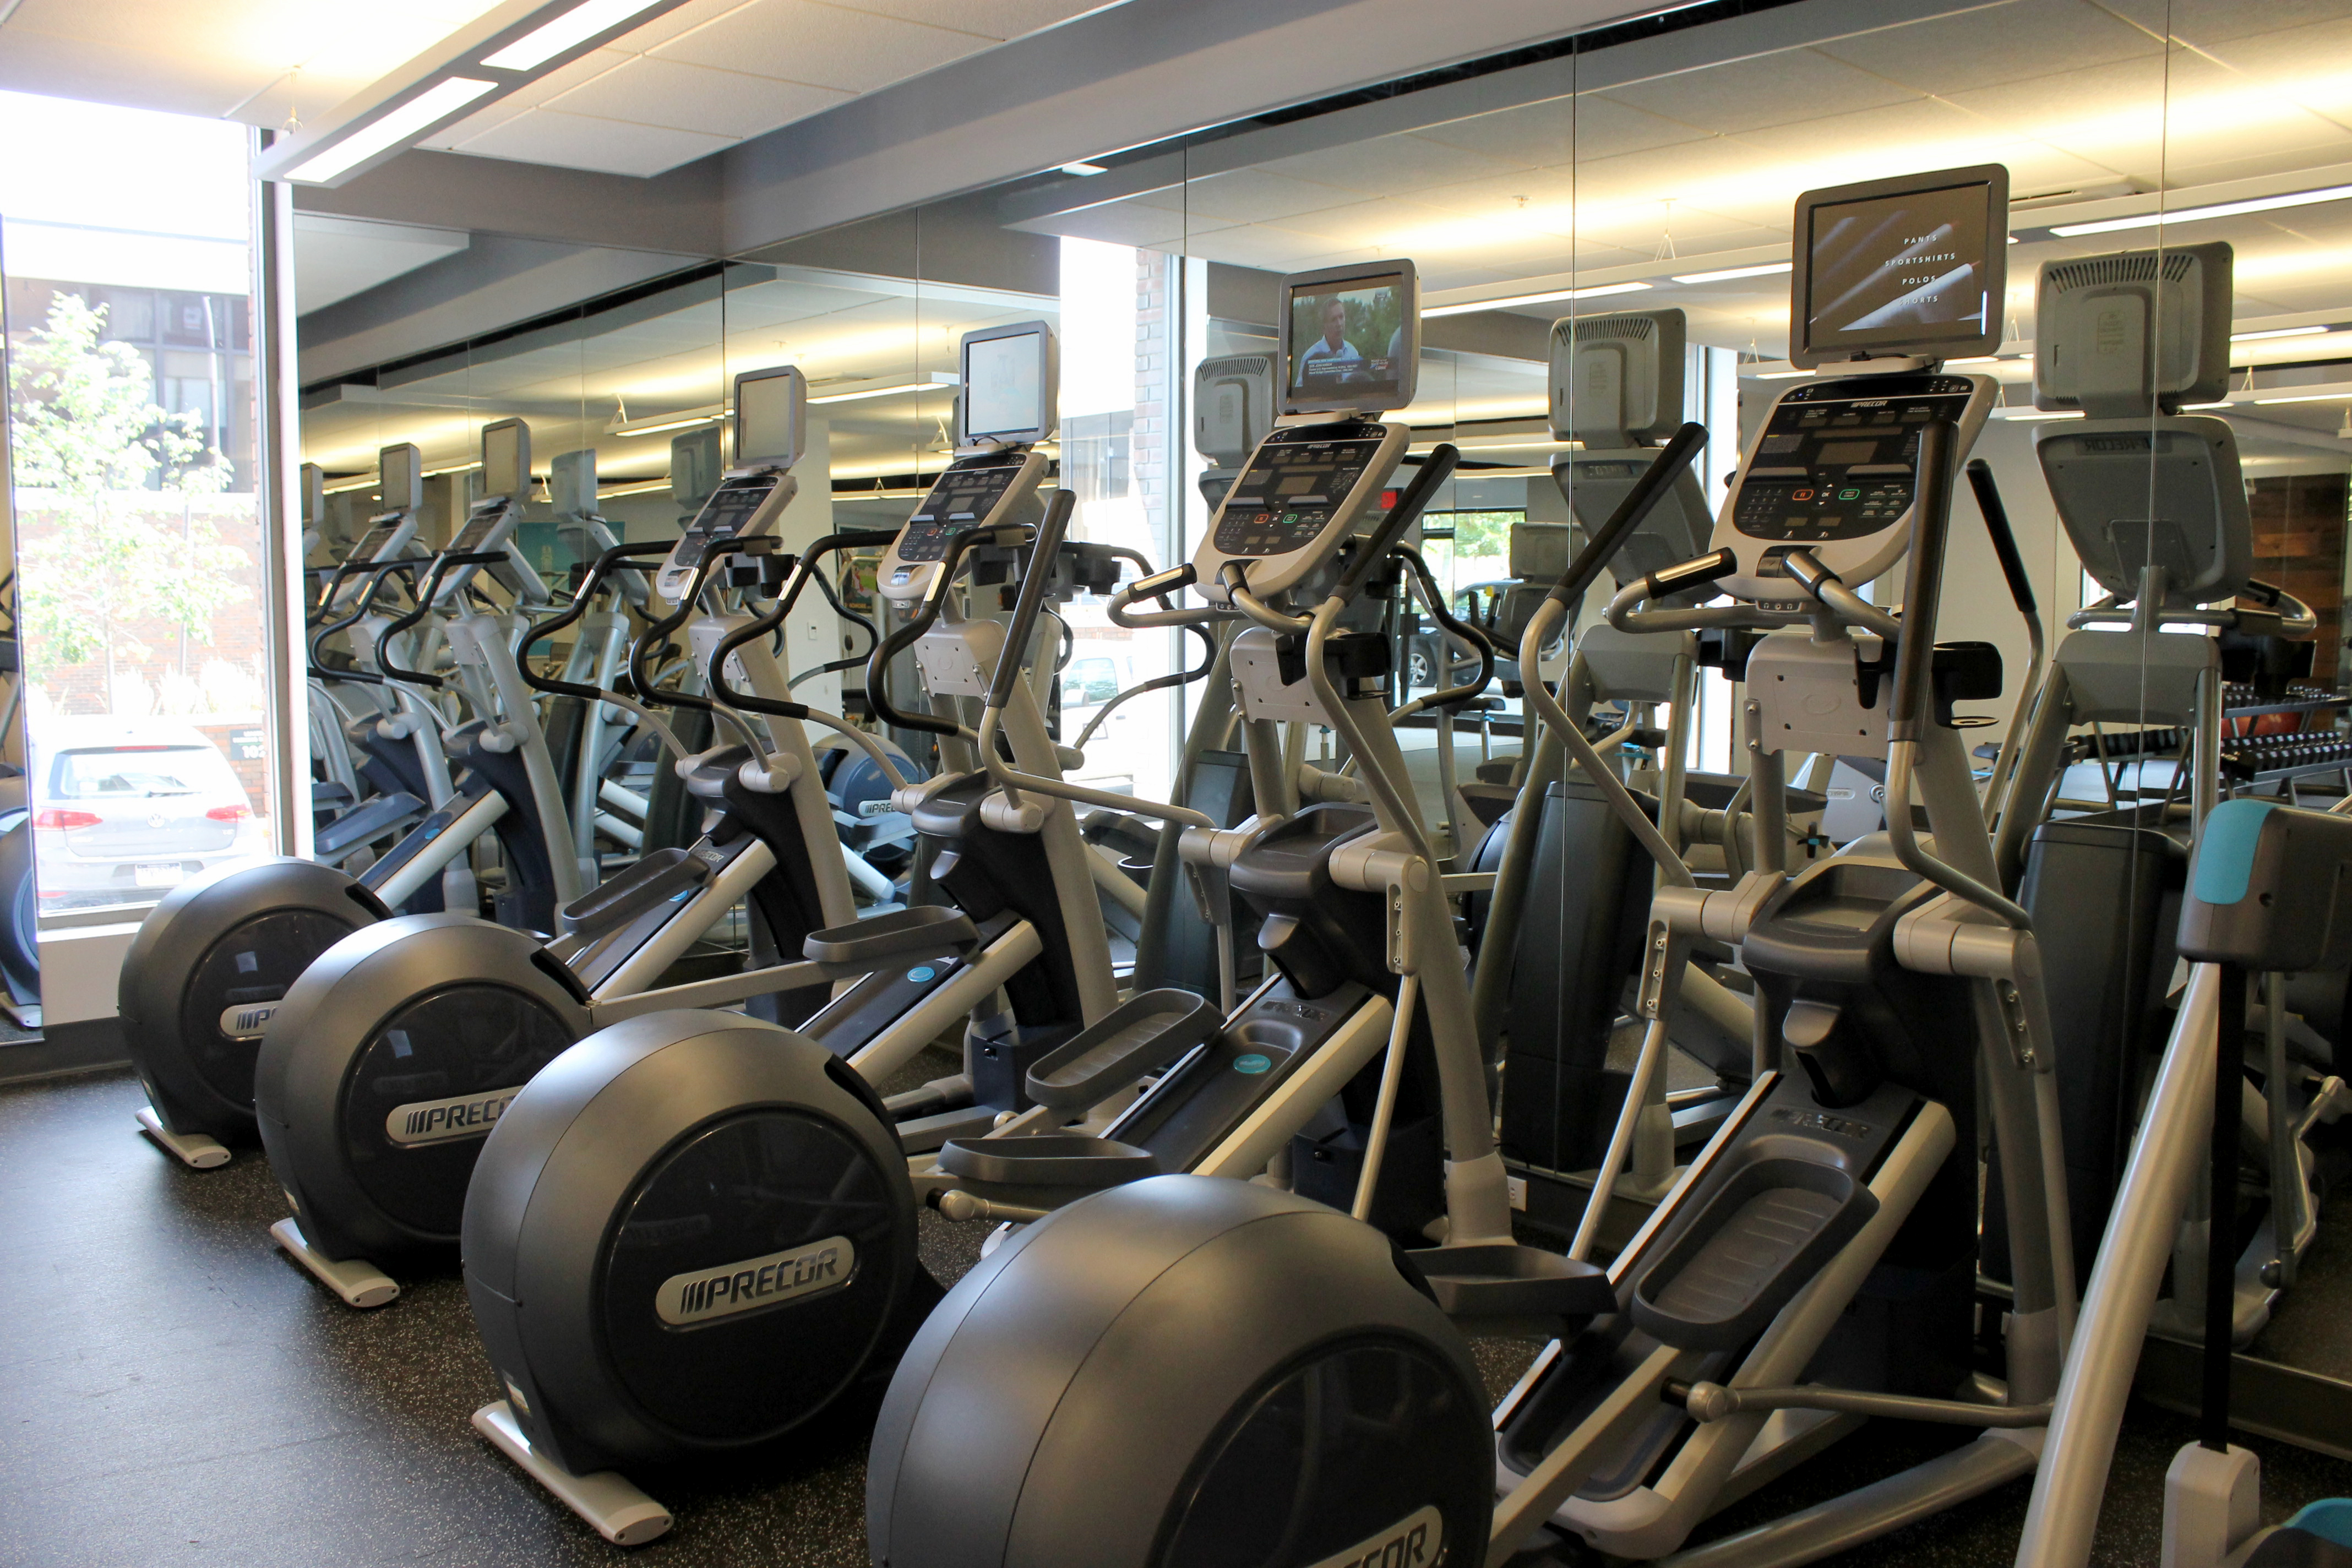 Wanting to restart your fitness routine? Here are some tips from Union Fitness’ blog!